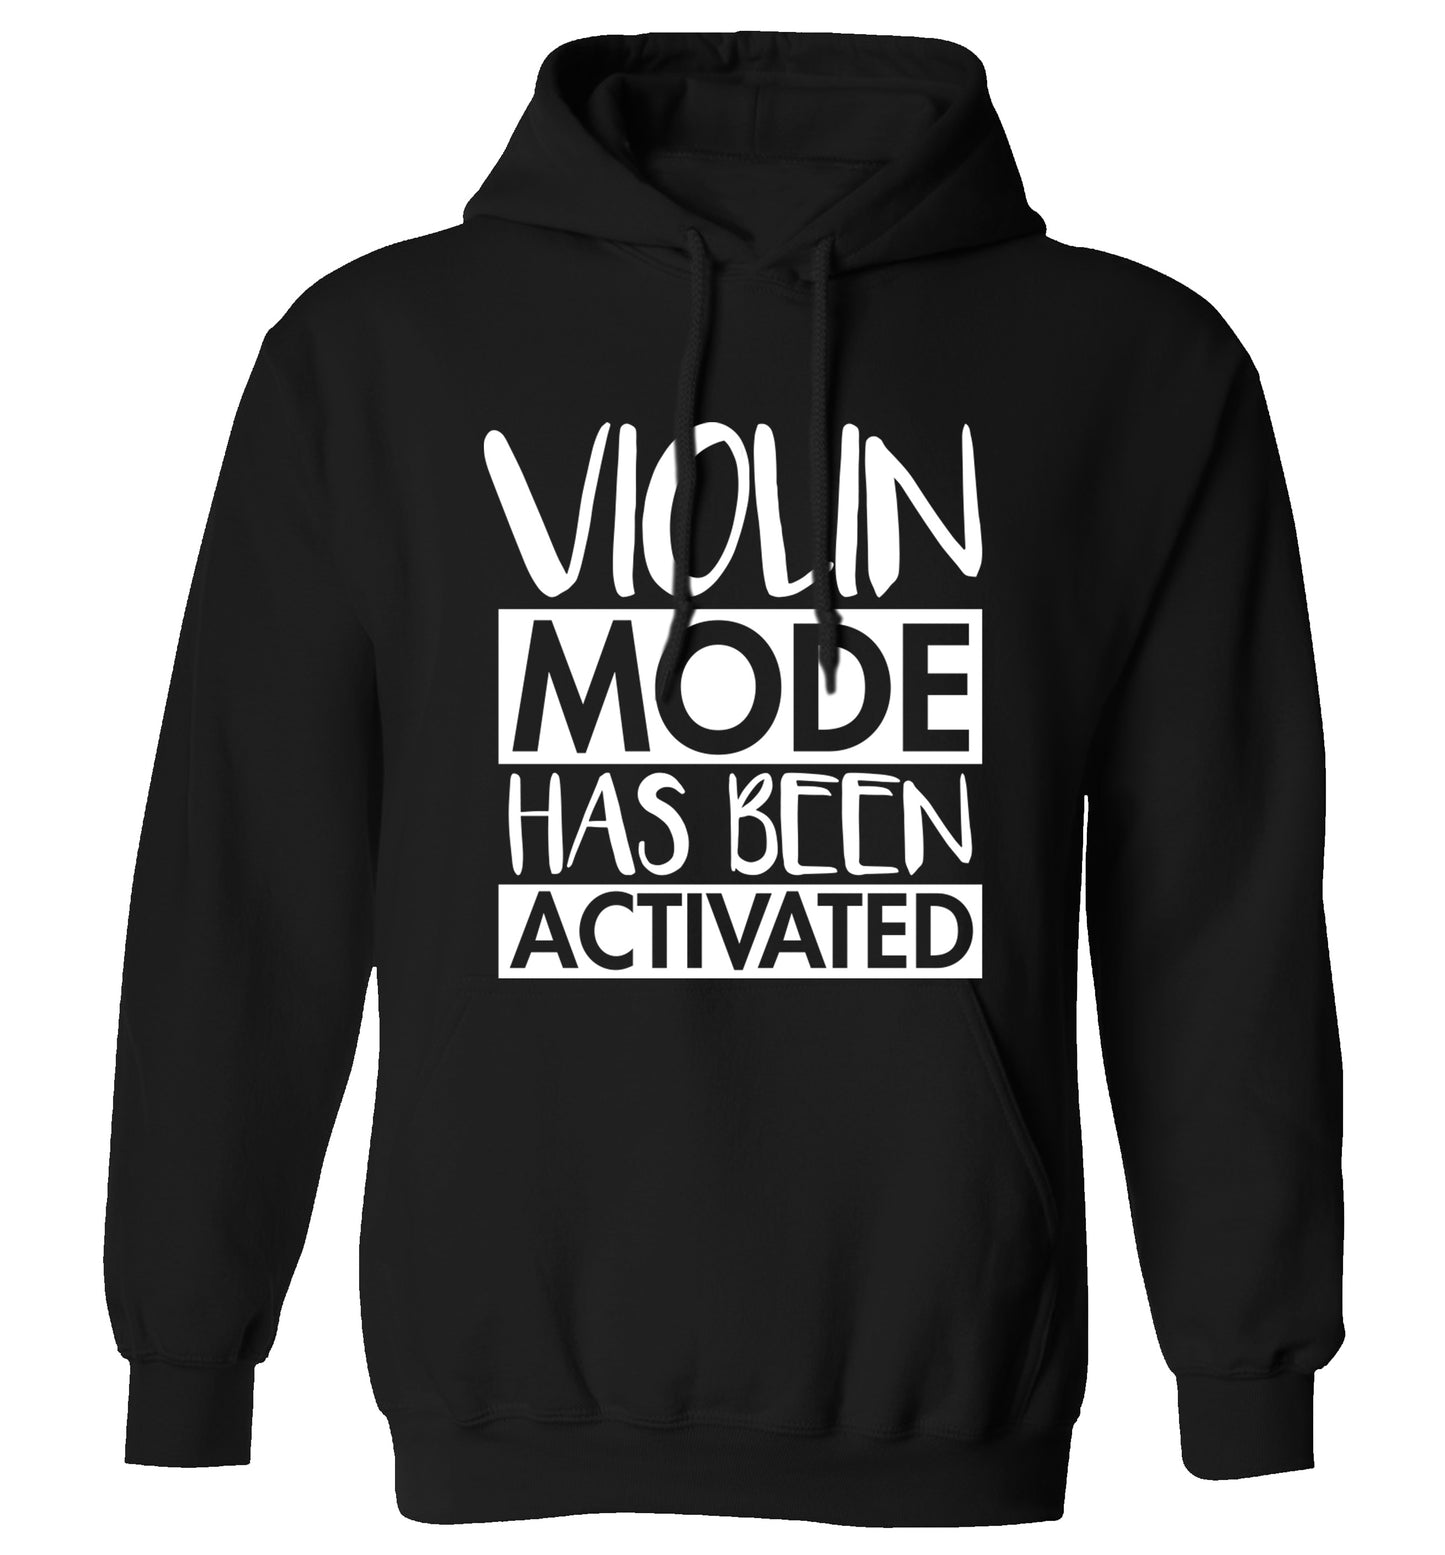 Violin Mode Activated adults unisex black hoodie 2XL